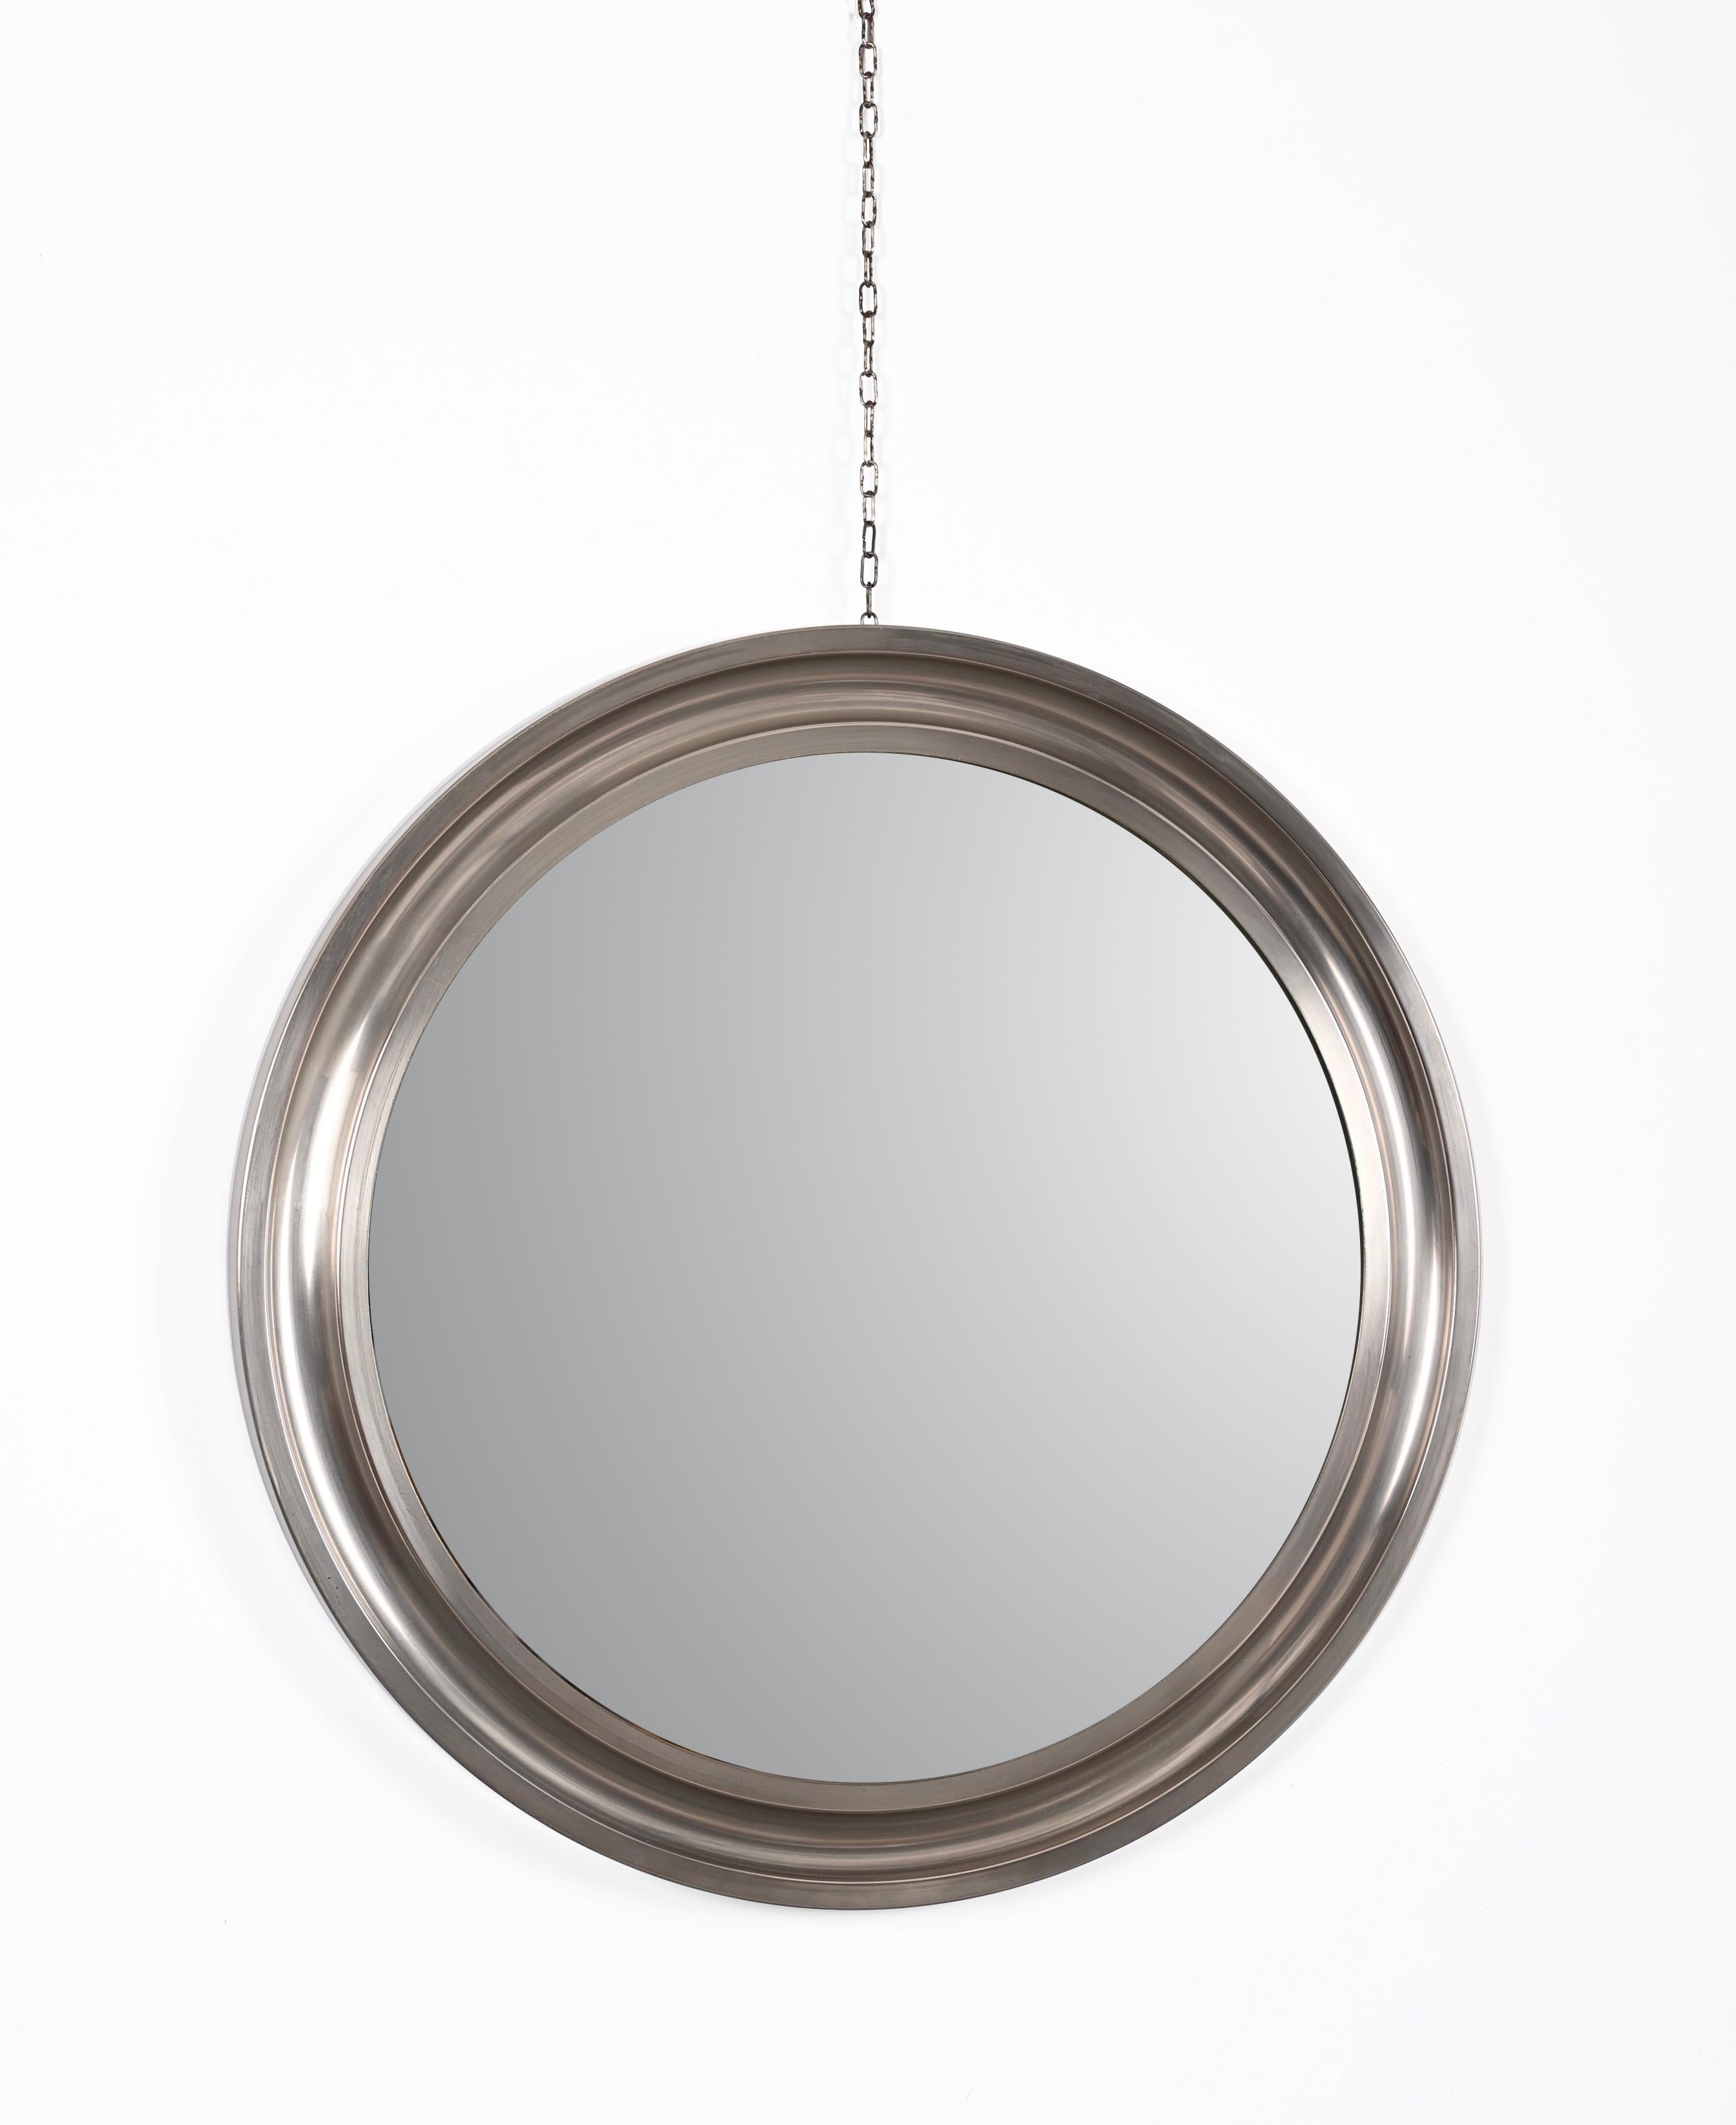 Beautiful midcentury rounded wall mirror in steel designed by Sergio Mazza and produced by Artemide in Italy in the 1960s.

This astonishing piece has a wonderful steel round frame. The condition is excellent as the light original patina gave